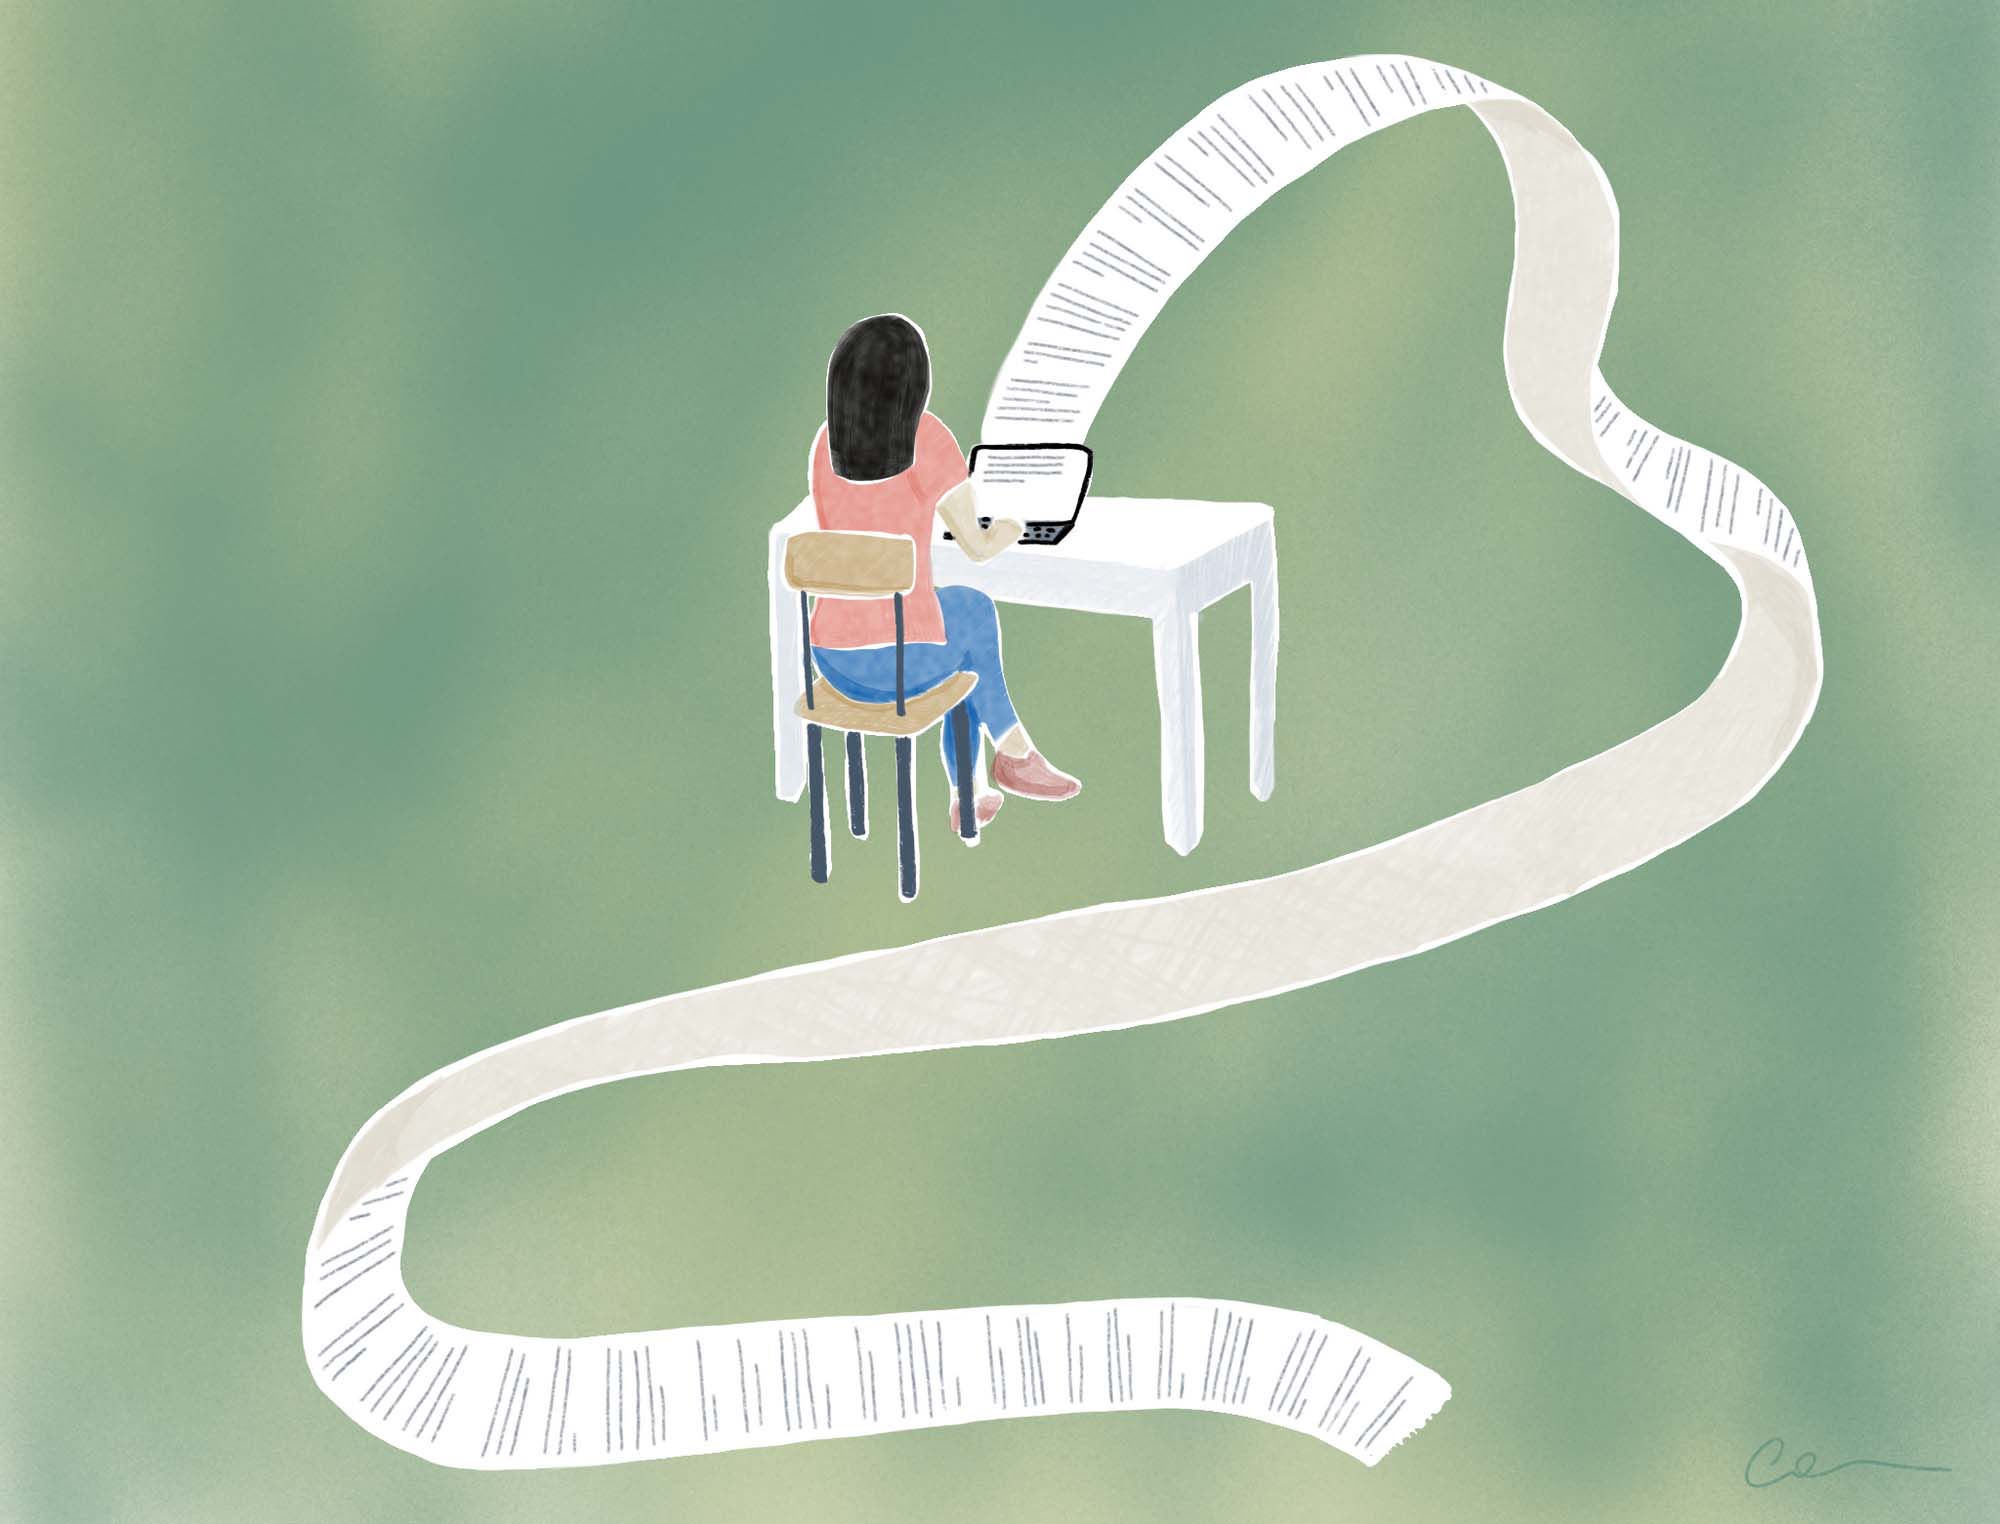 Illustration: a person sits at a table typing, with a long ribbon of paper emerging